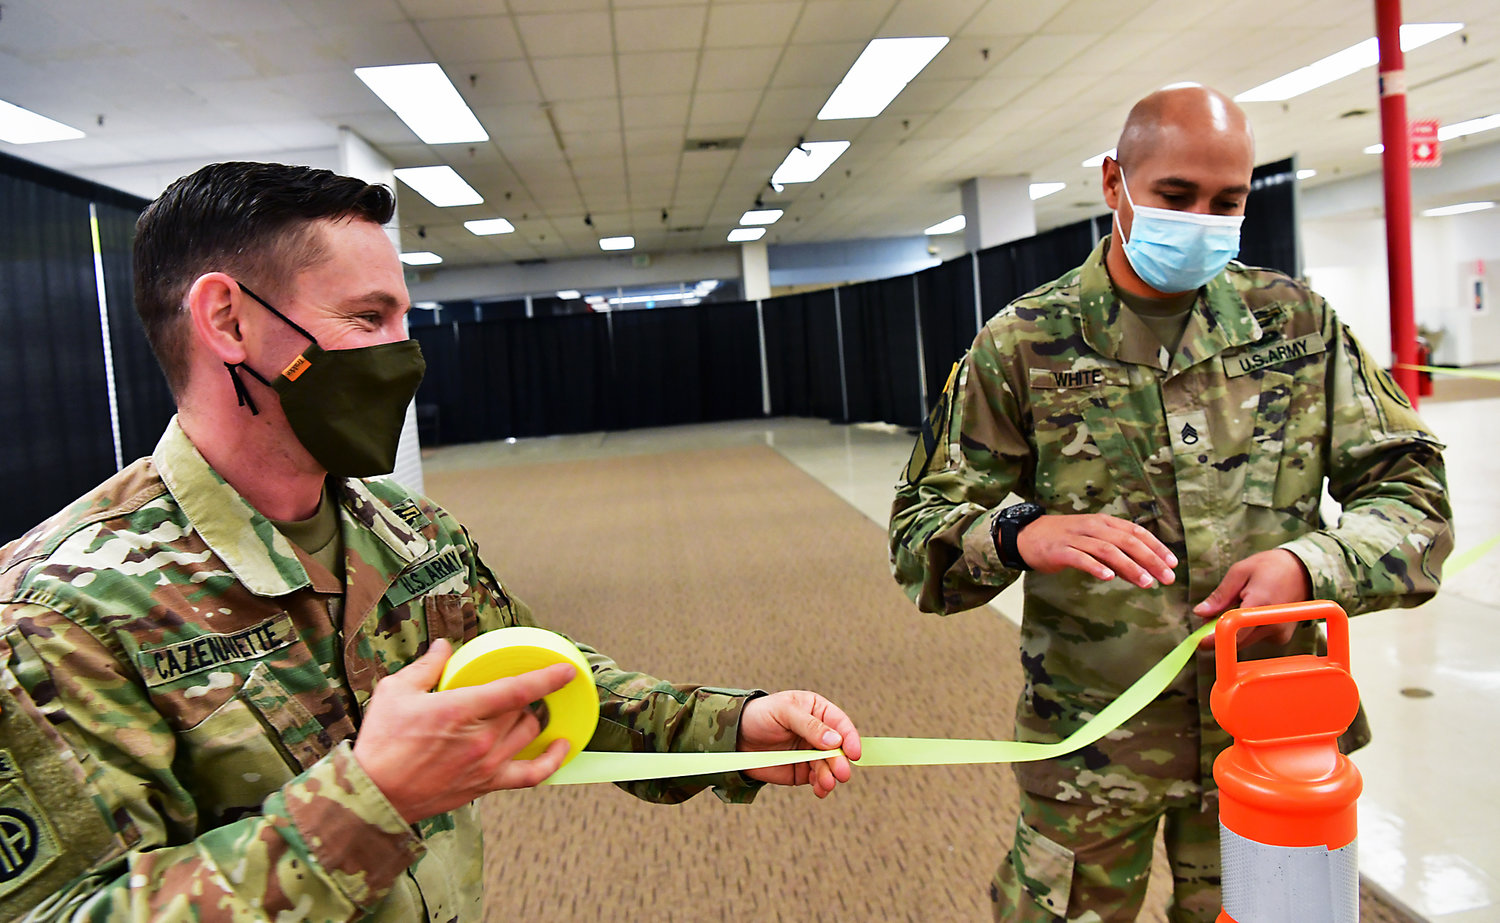 Washington Army National Guard Staff Sgt. Michael Cazenavette, left, and Staff Sgt. Earl White, place ribbon through cones on Tuesday, April, 27, to direct participants for Wednesday’s Public Walk-in Covid-19 Vaccine Clinic to be held in the former Sears location in the Lewis County Mall.